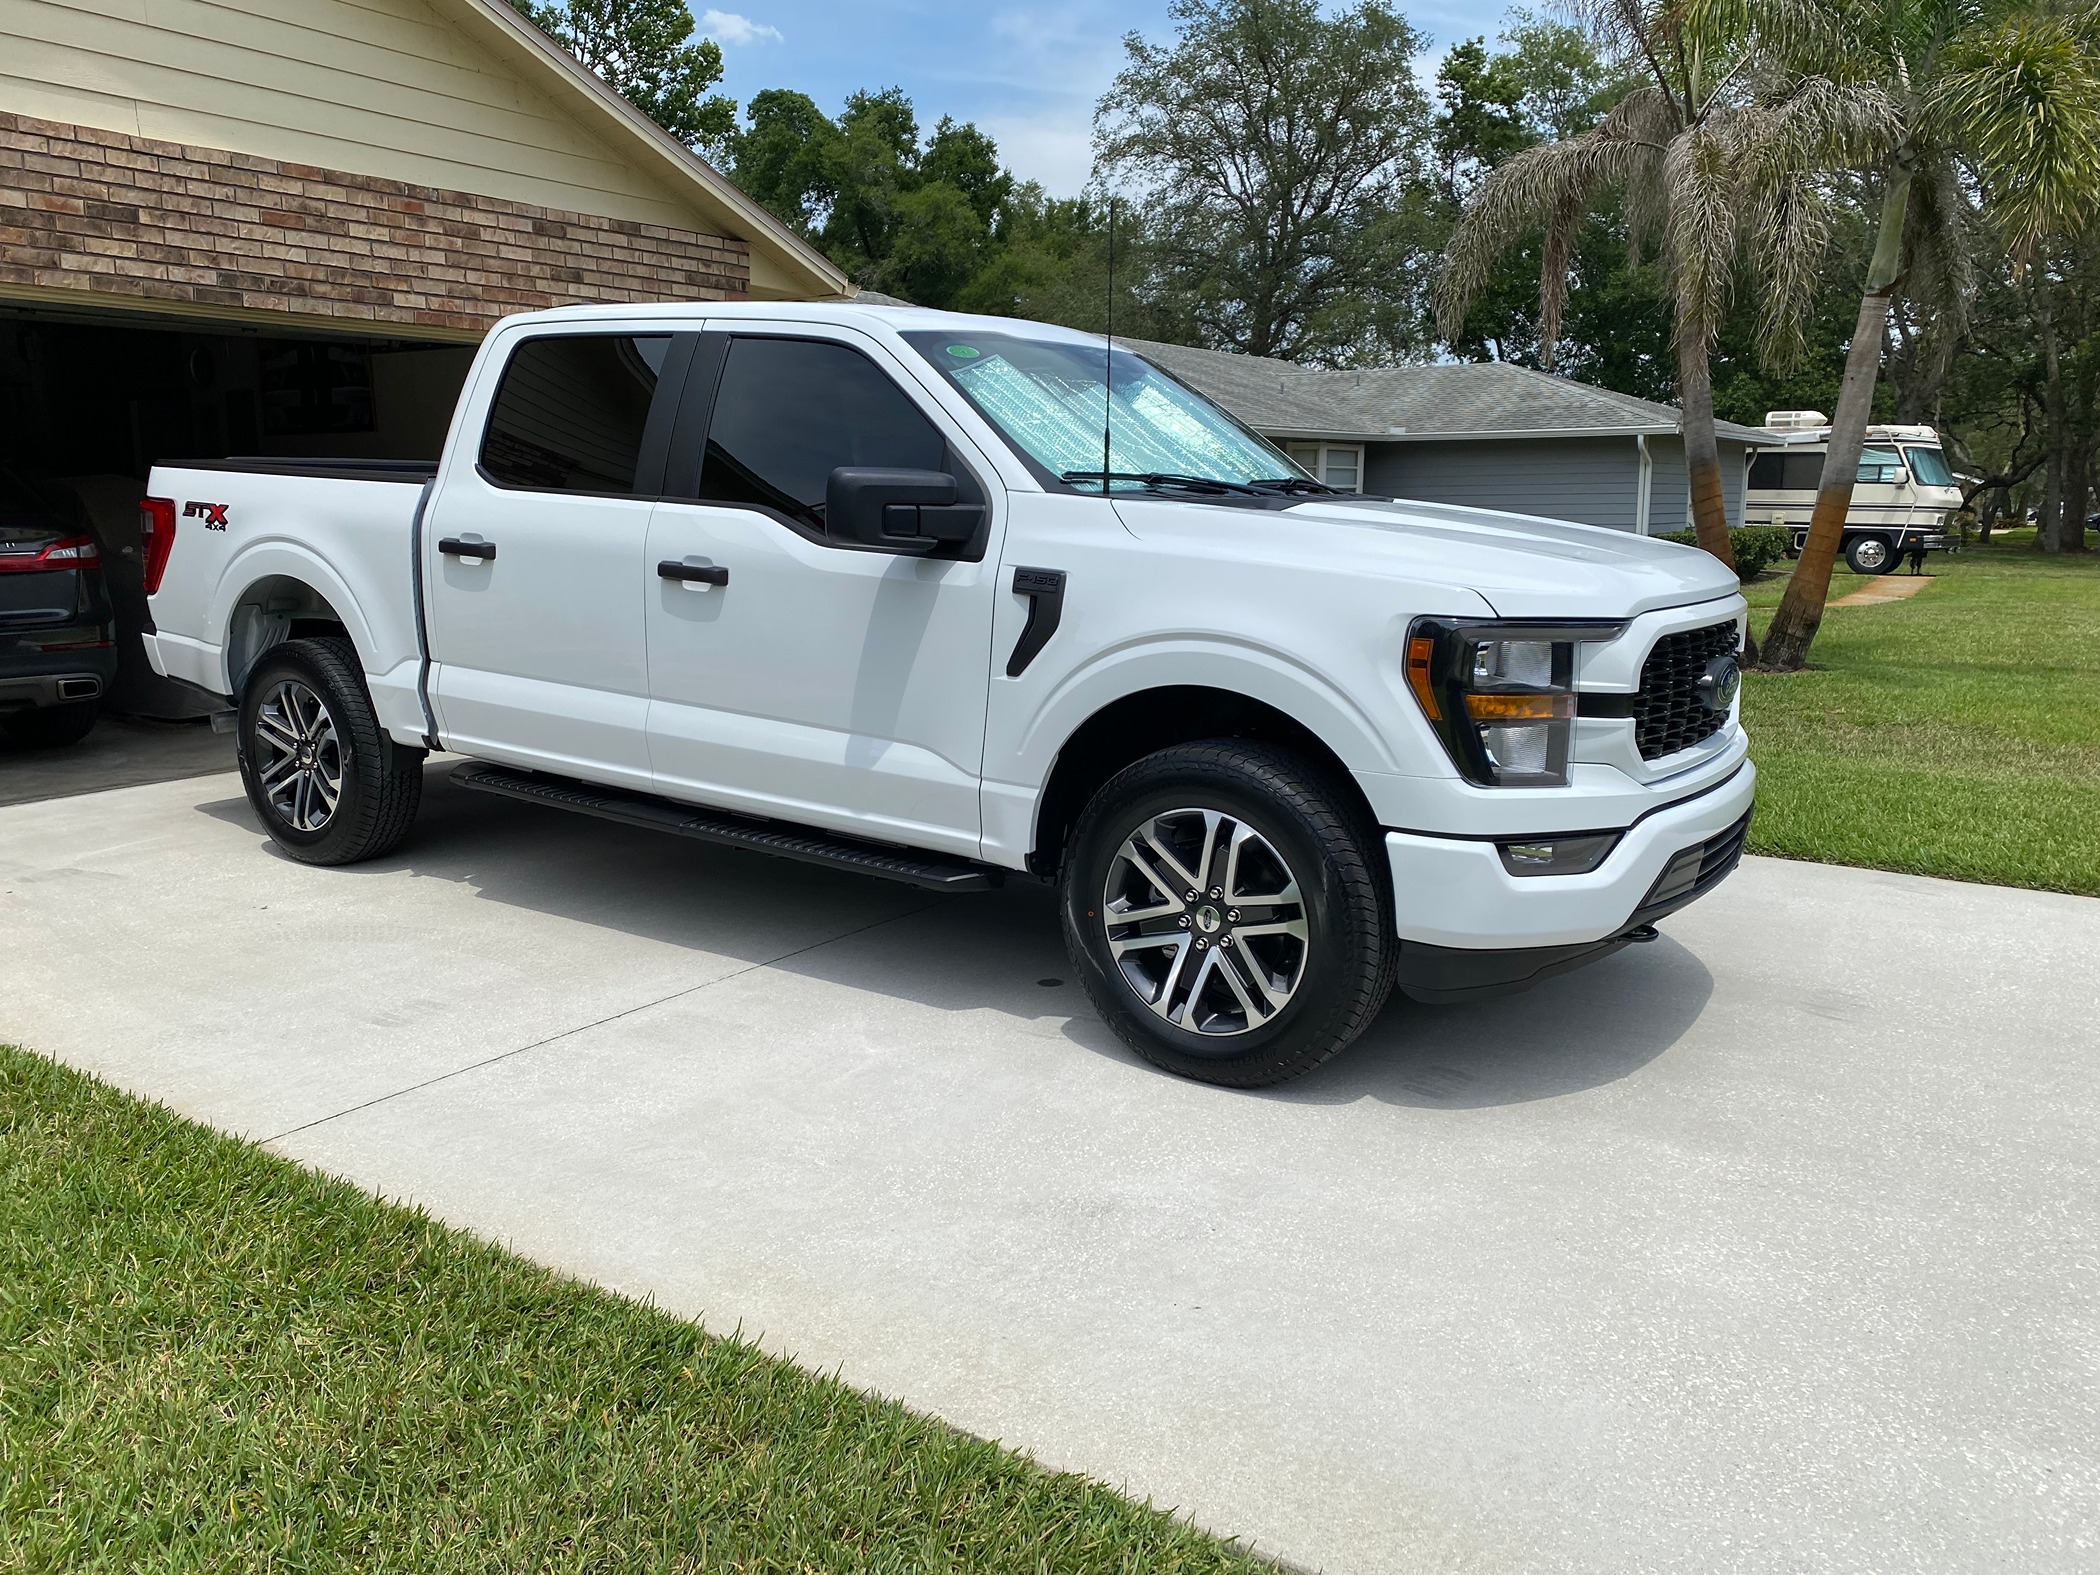 Ford F-150 Random F-150 Photos of the Day - Post Yours! 📸 🤳 IMG_1285